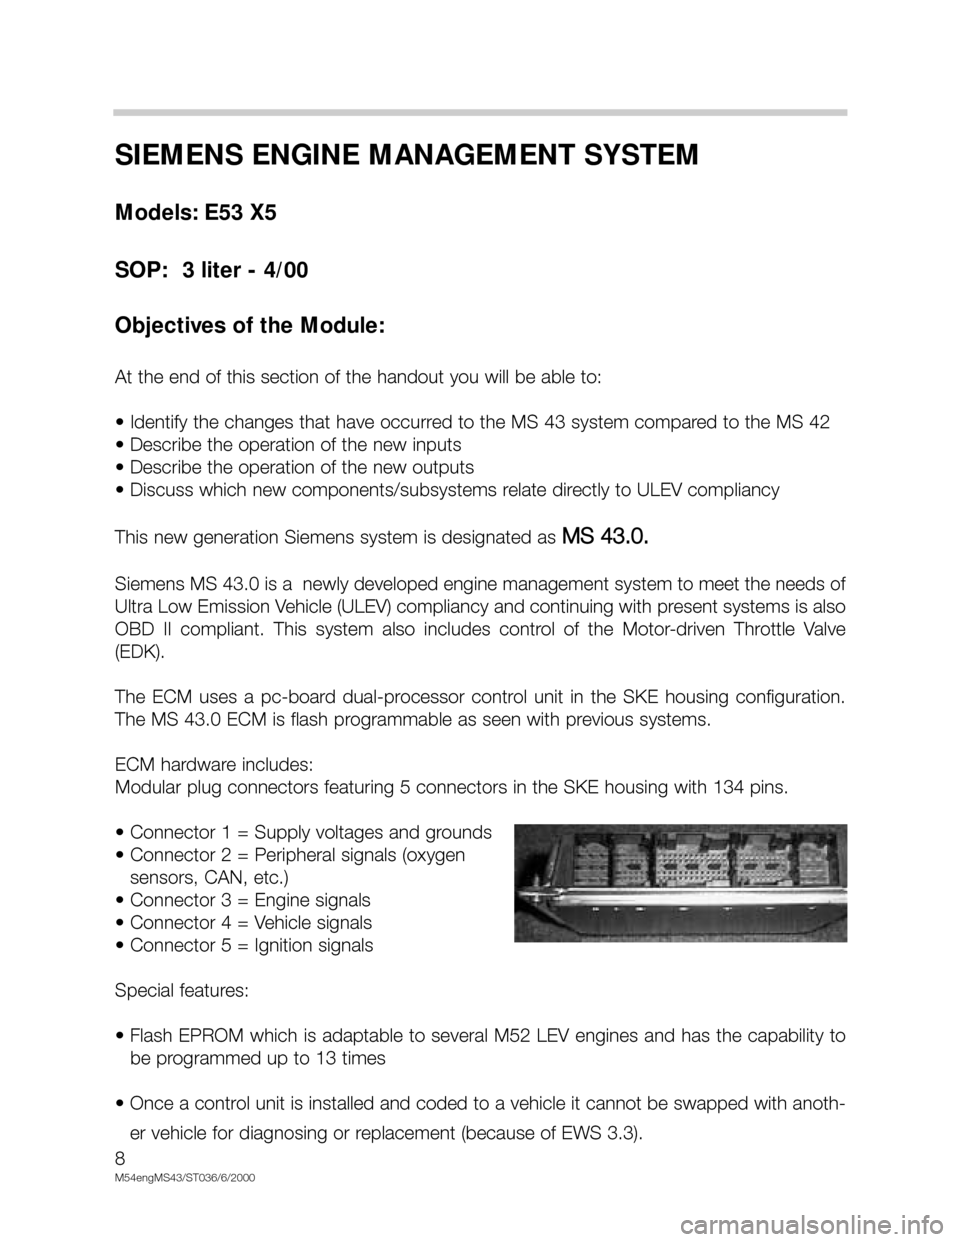 BMW X5 2002 E53 M54 Engine Workshop Manual 8
M54engMS43/ST036/6/2000
SIEMENS ENGINE MANAGEMENT SYSTEM
Models: E53 X5
SOP:  3 liter - 4/00
Objectives of the Module:
At the end of this section of the handout you will be able to:
• Identify the